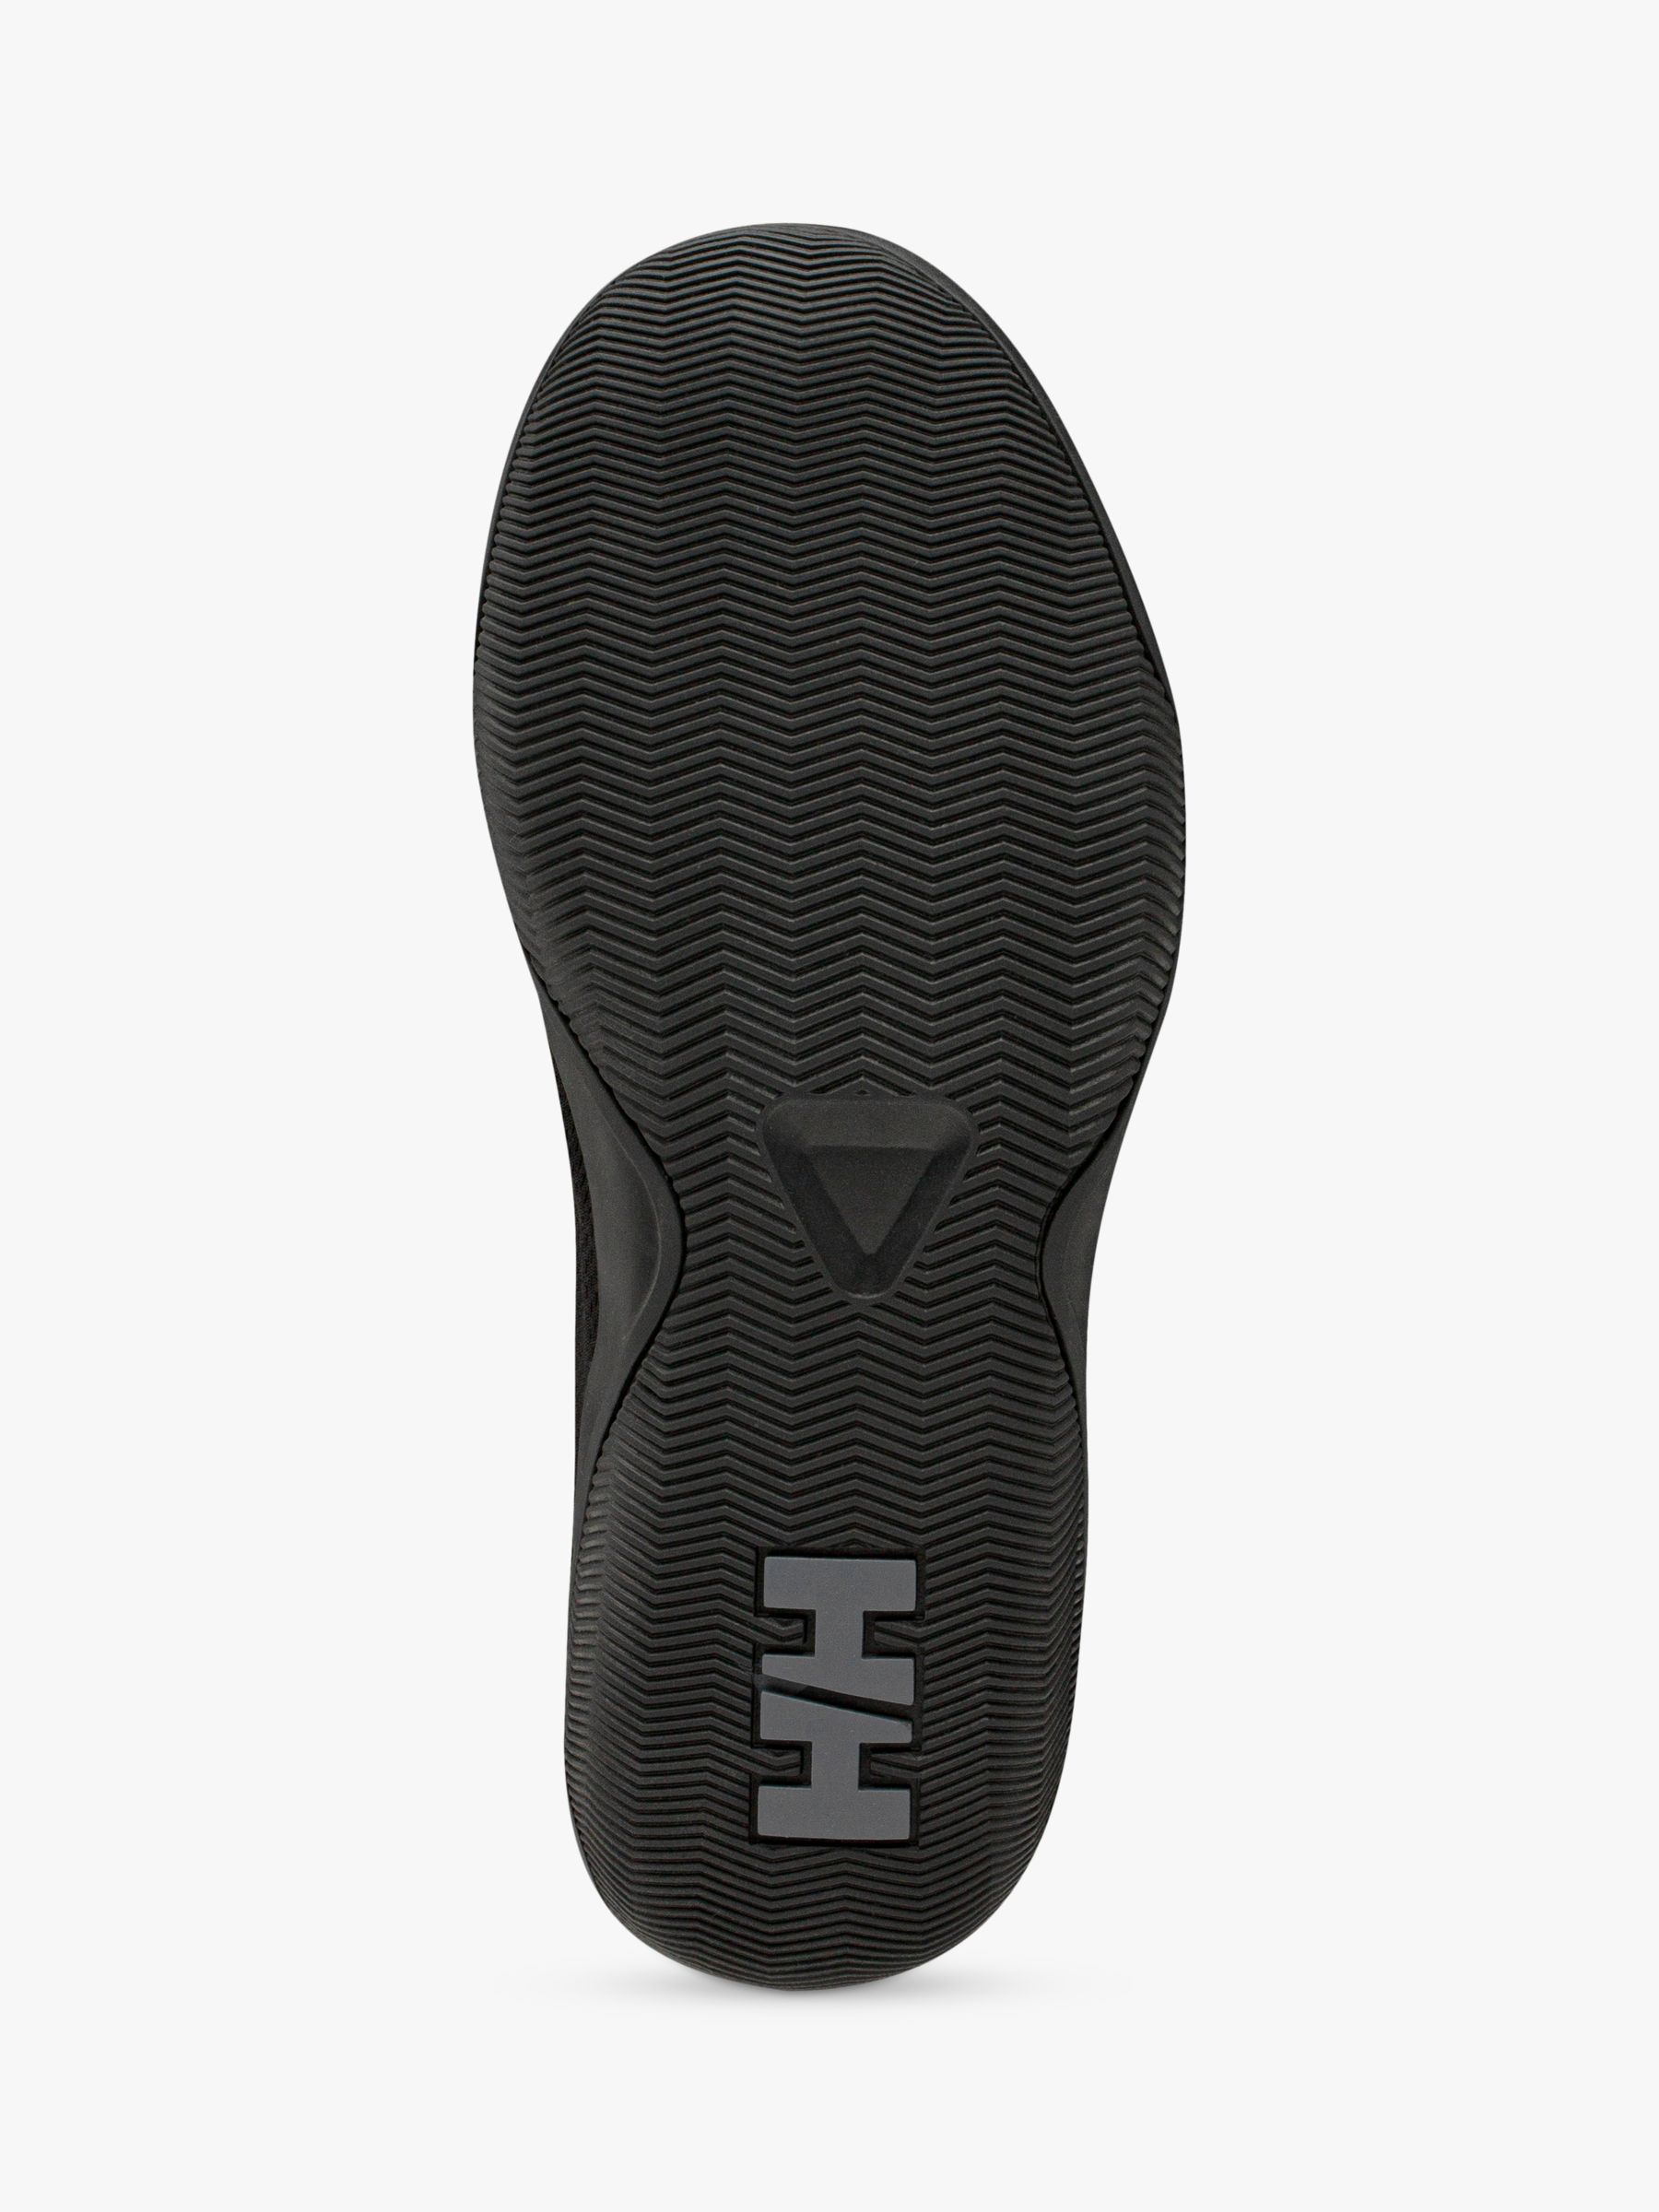 Buy Helly Hansen Crest Watermoc Women's Water Shoes, Black/Charcoal Online at johnlewis.com